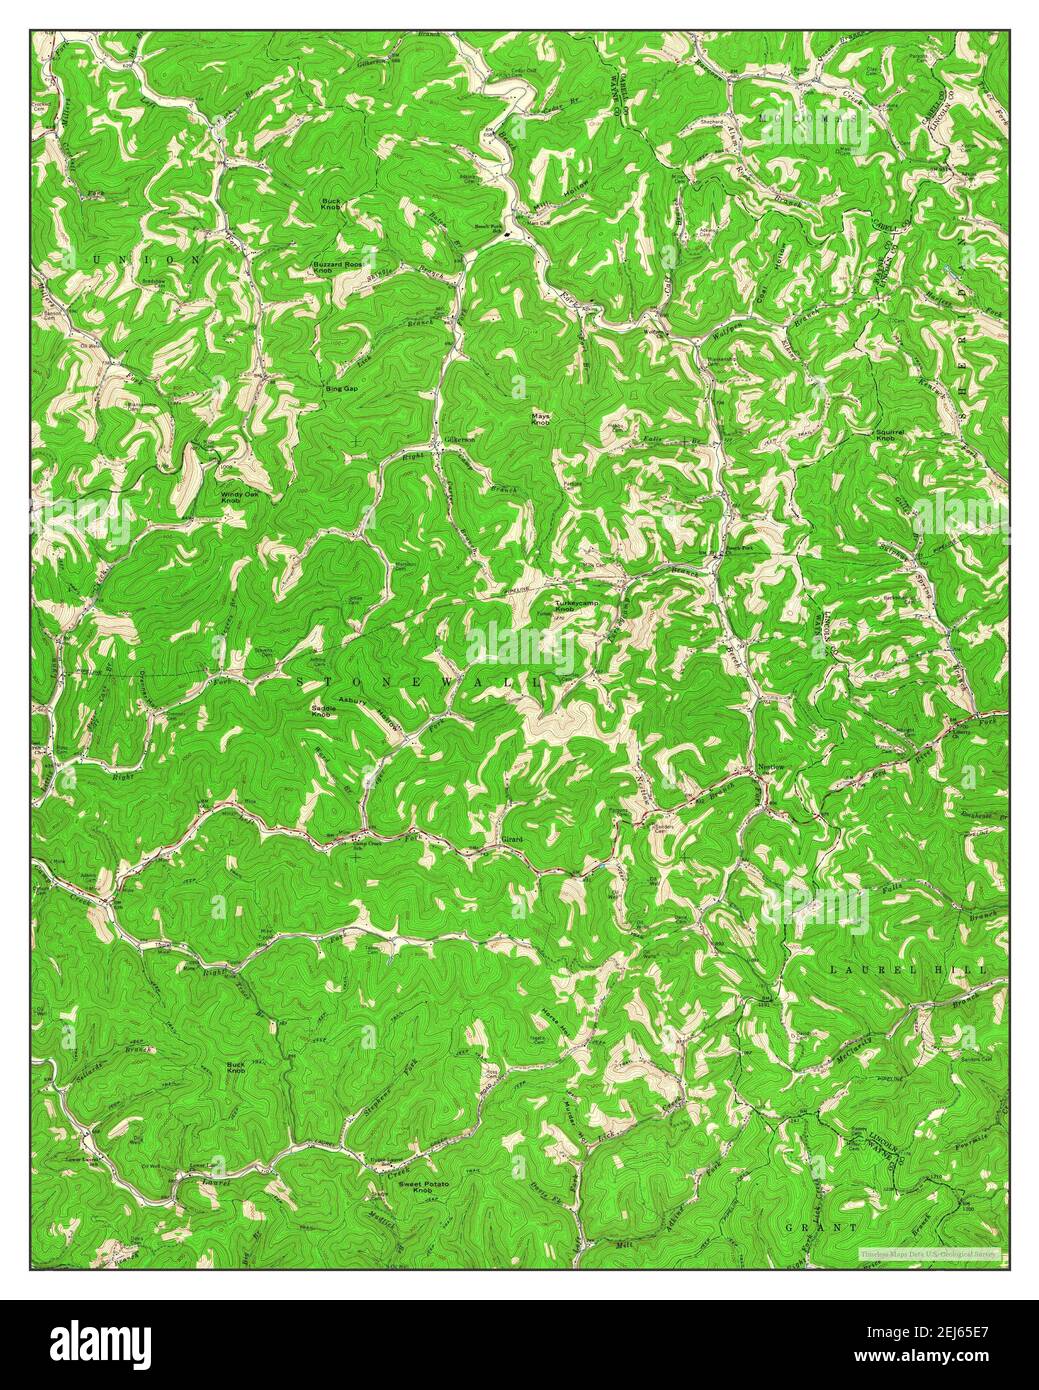 Nestlow, West Virginia, map 1962, 1:24000, United States of America by Timeless Maps, data U.S. Geological Survey Stock Photo